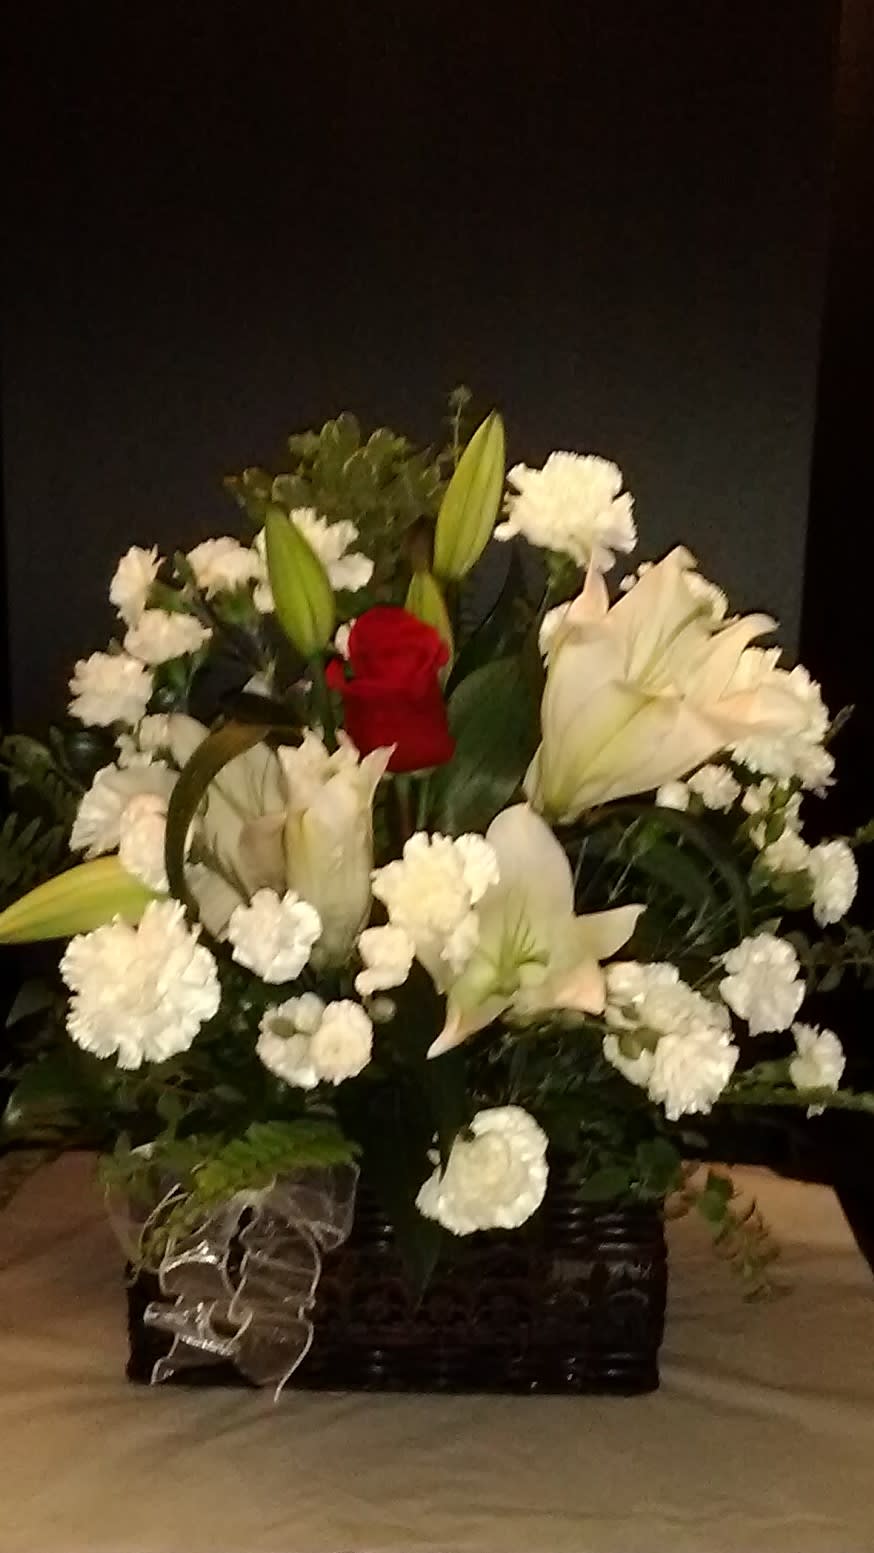 White lily, White carnations arranged in a square basket with a red